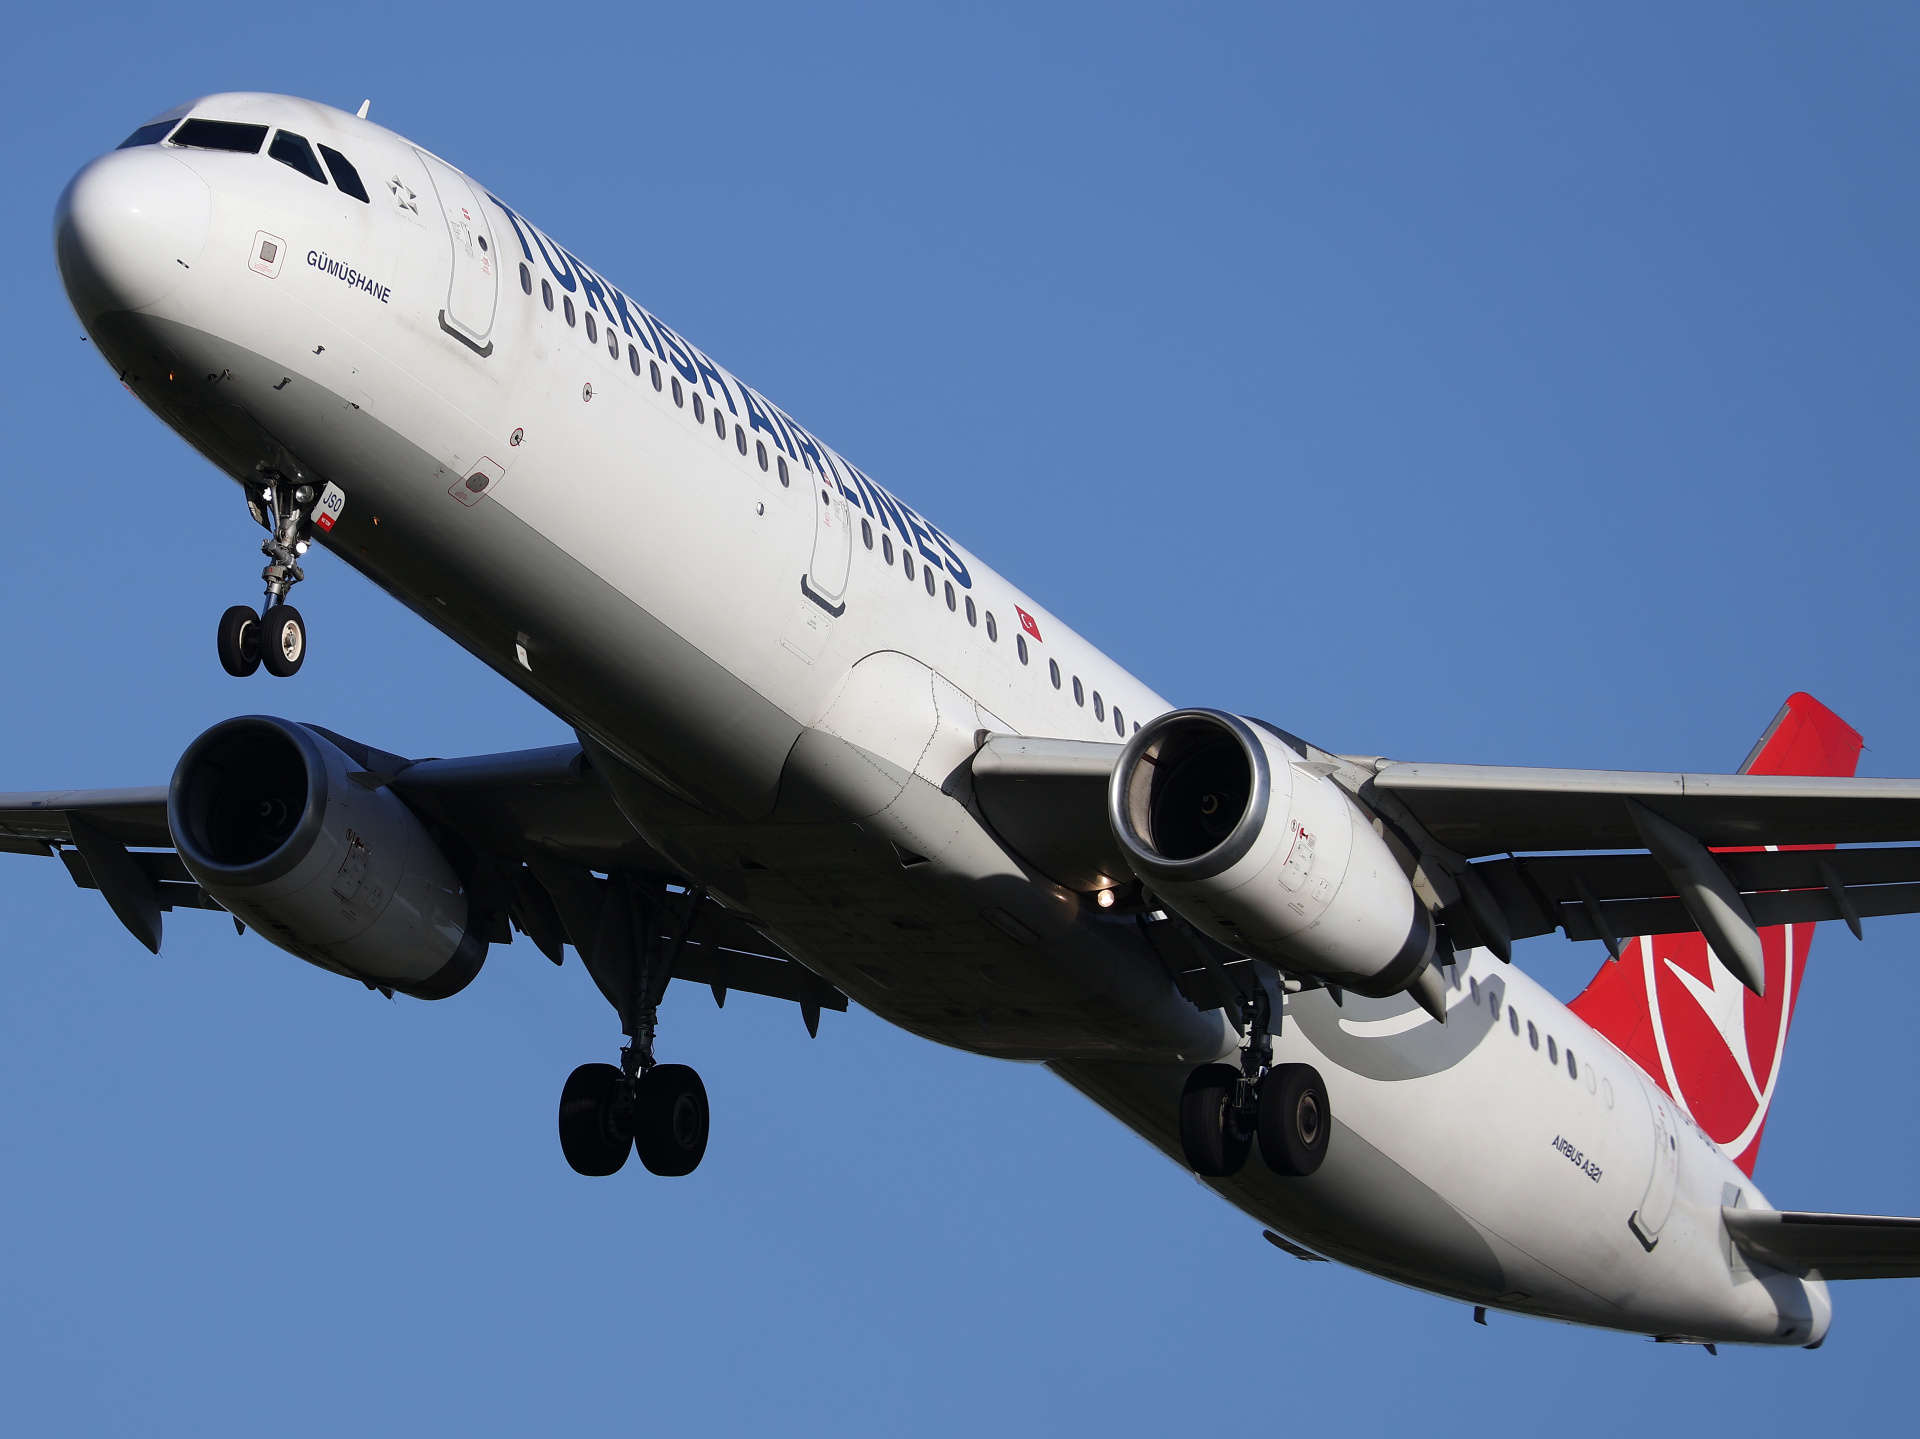 TC-JSO (Aircraft » EPWA Spotting » Airbus A321-200 » THY Turkish Airlines)